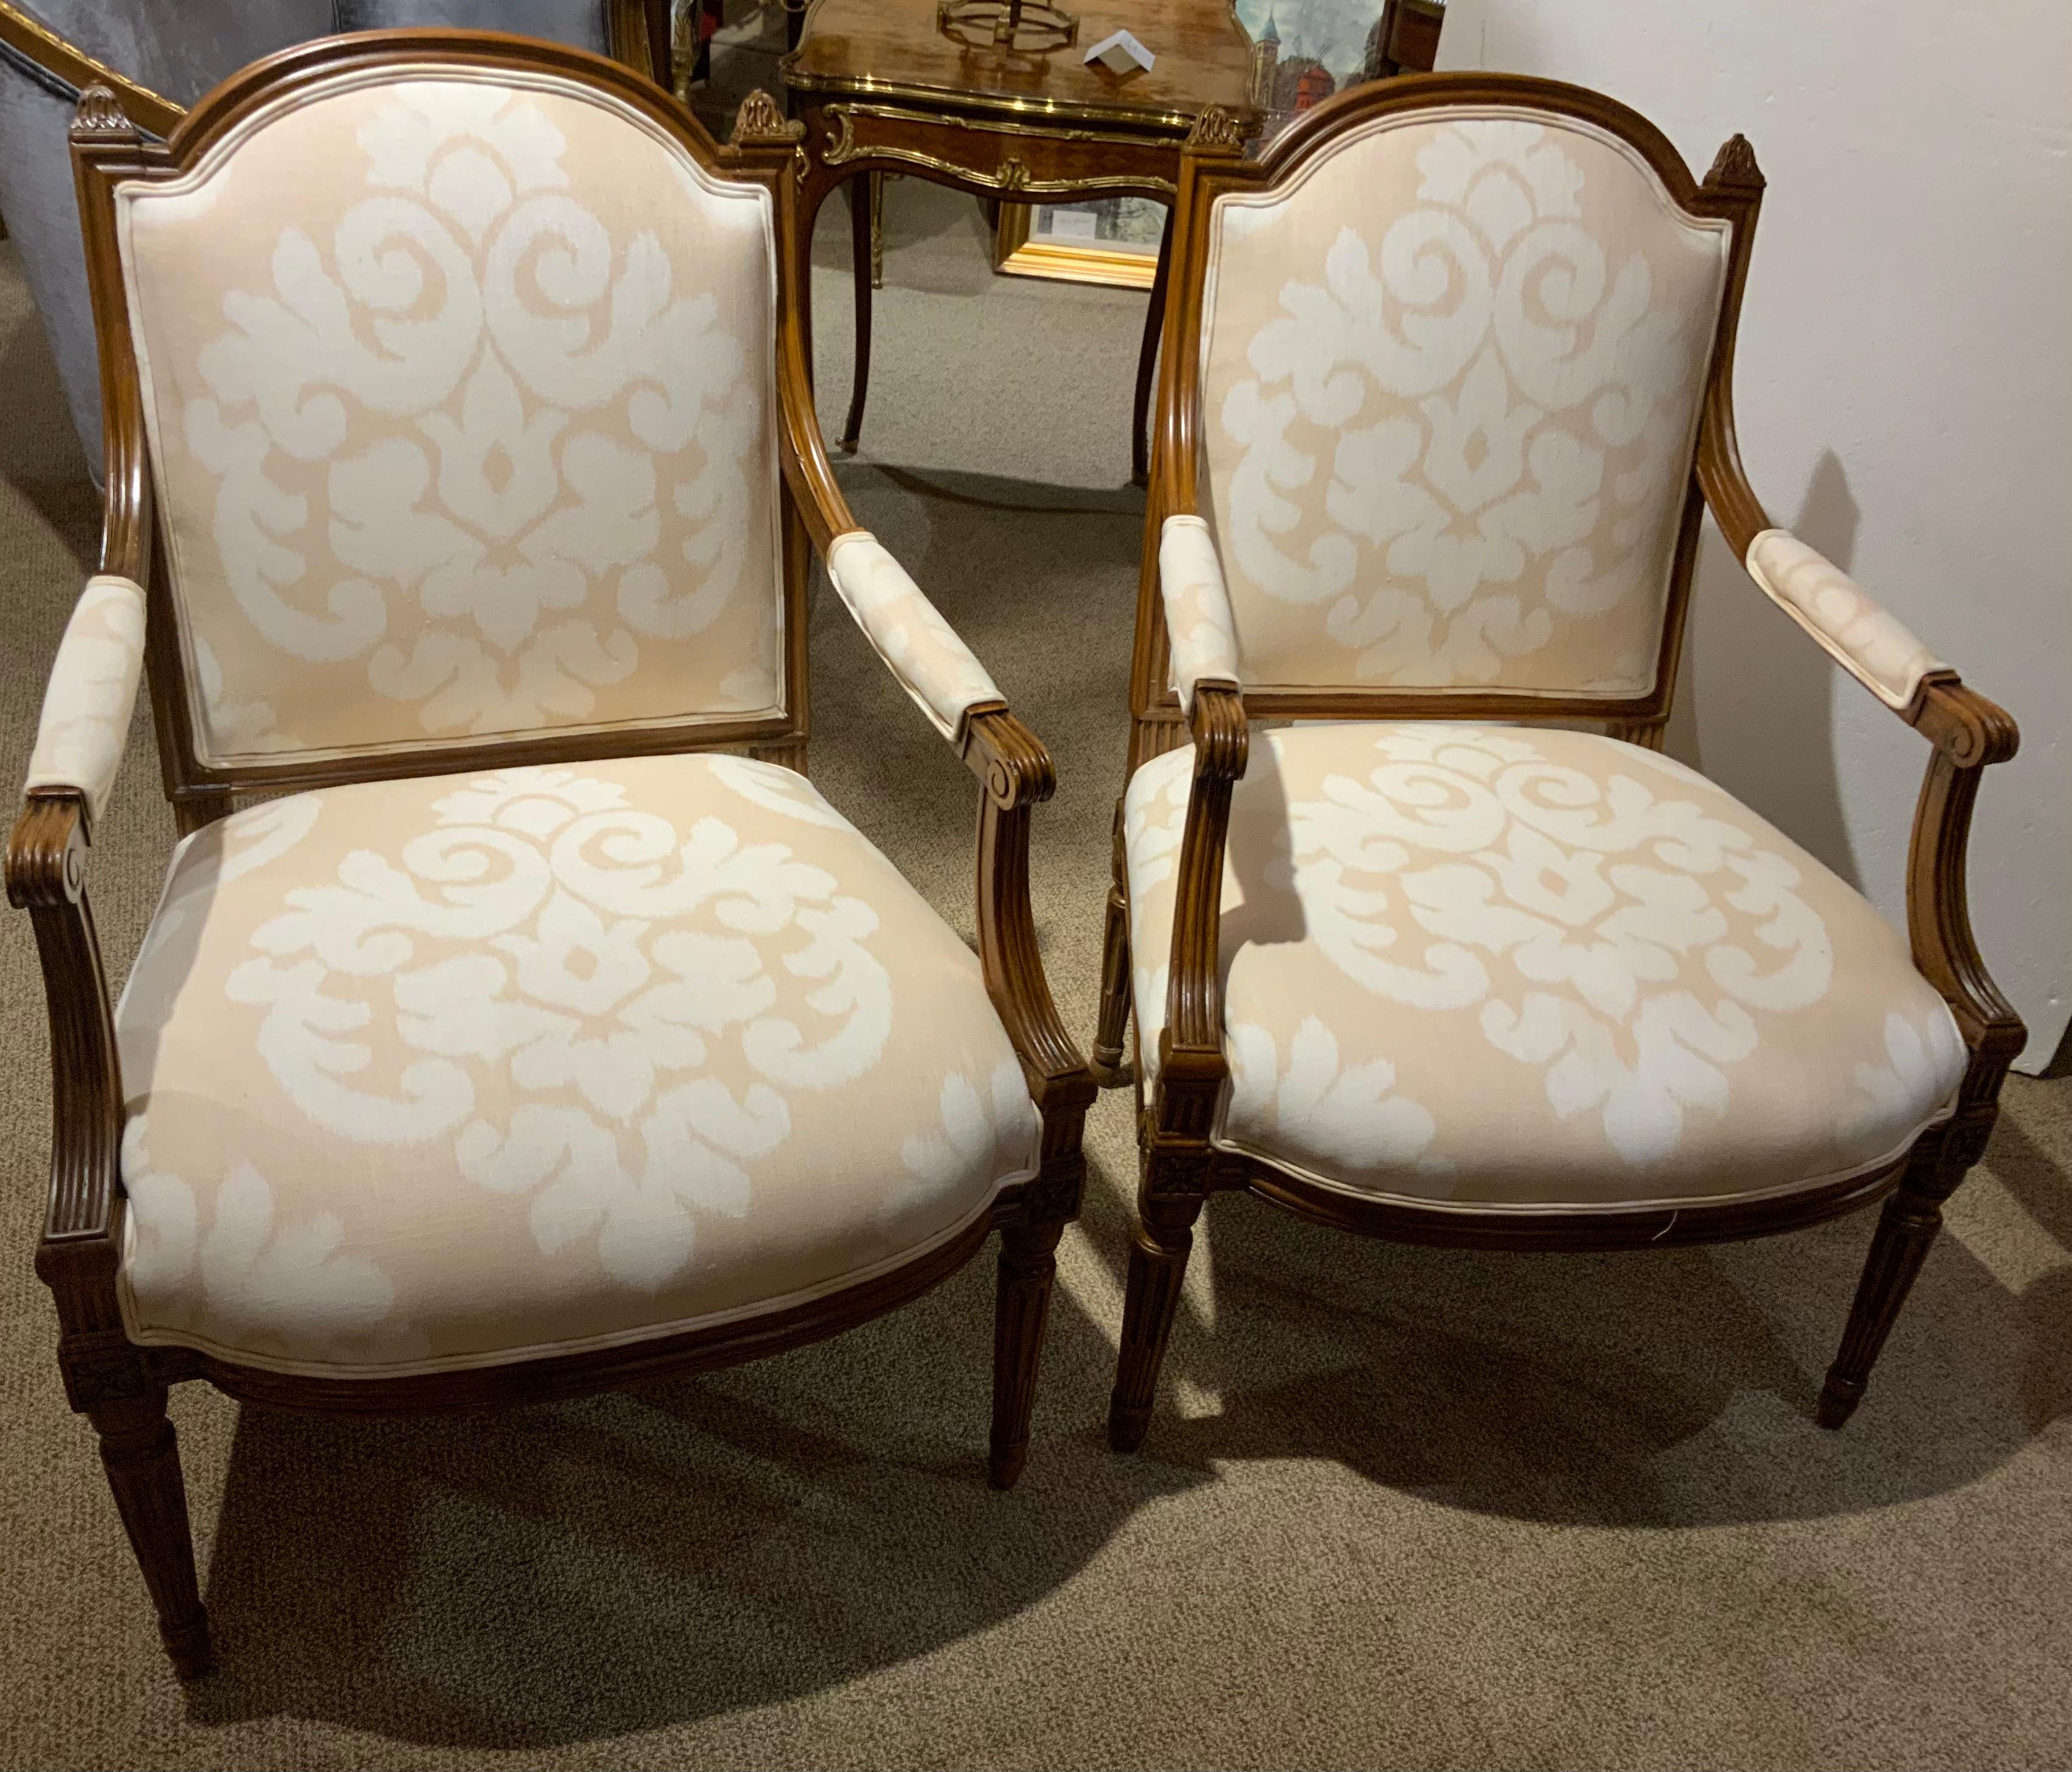 Pair of Walnut Louis XVI—Style Arm Chairs 19th Century with Domed Back For Sale 3